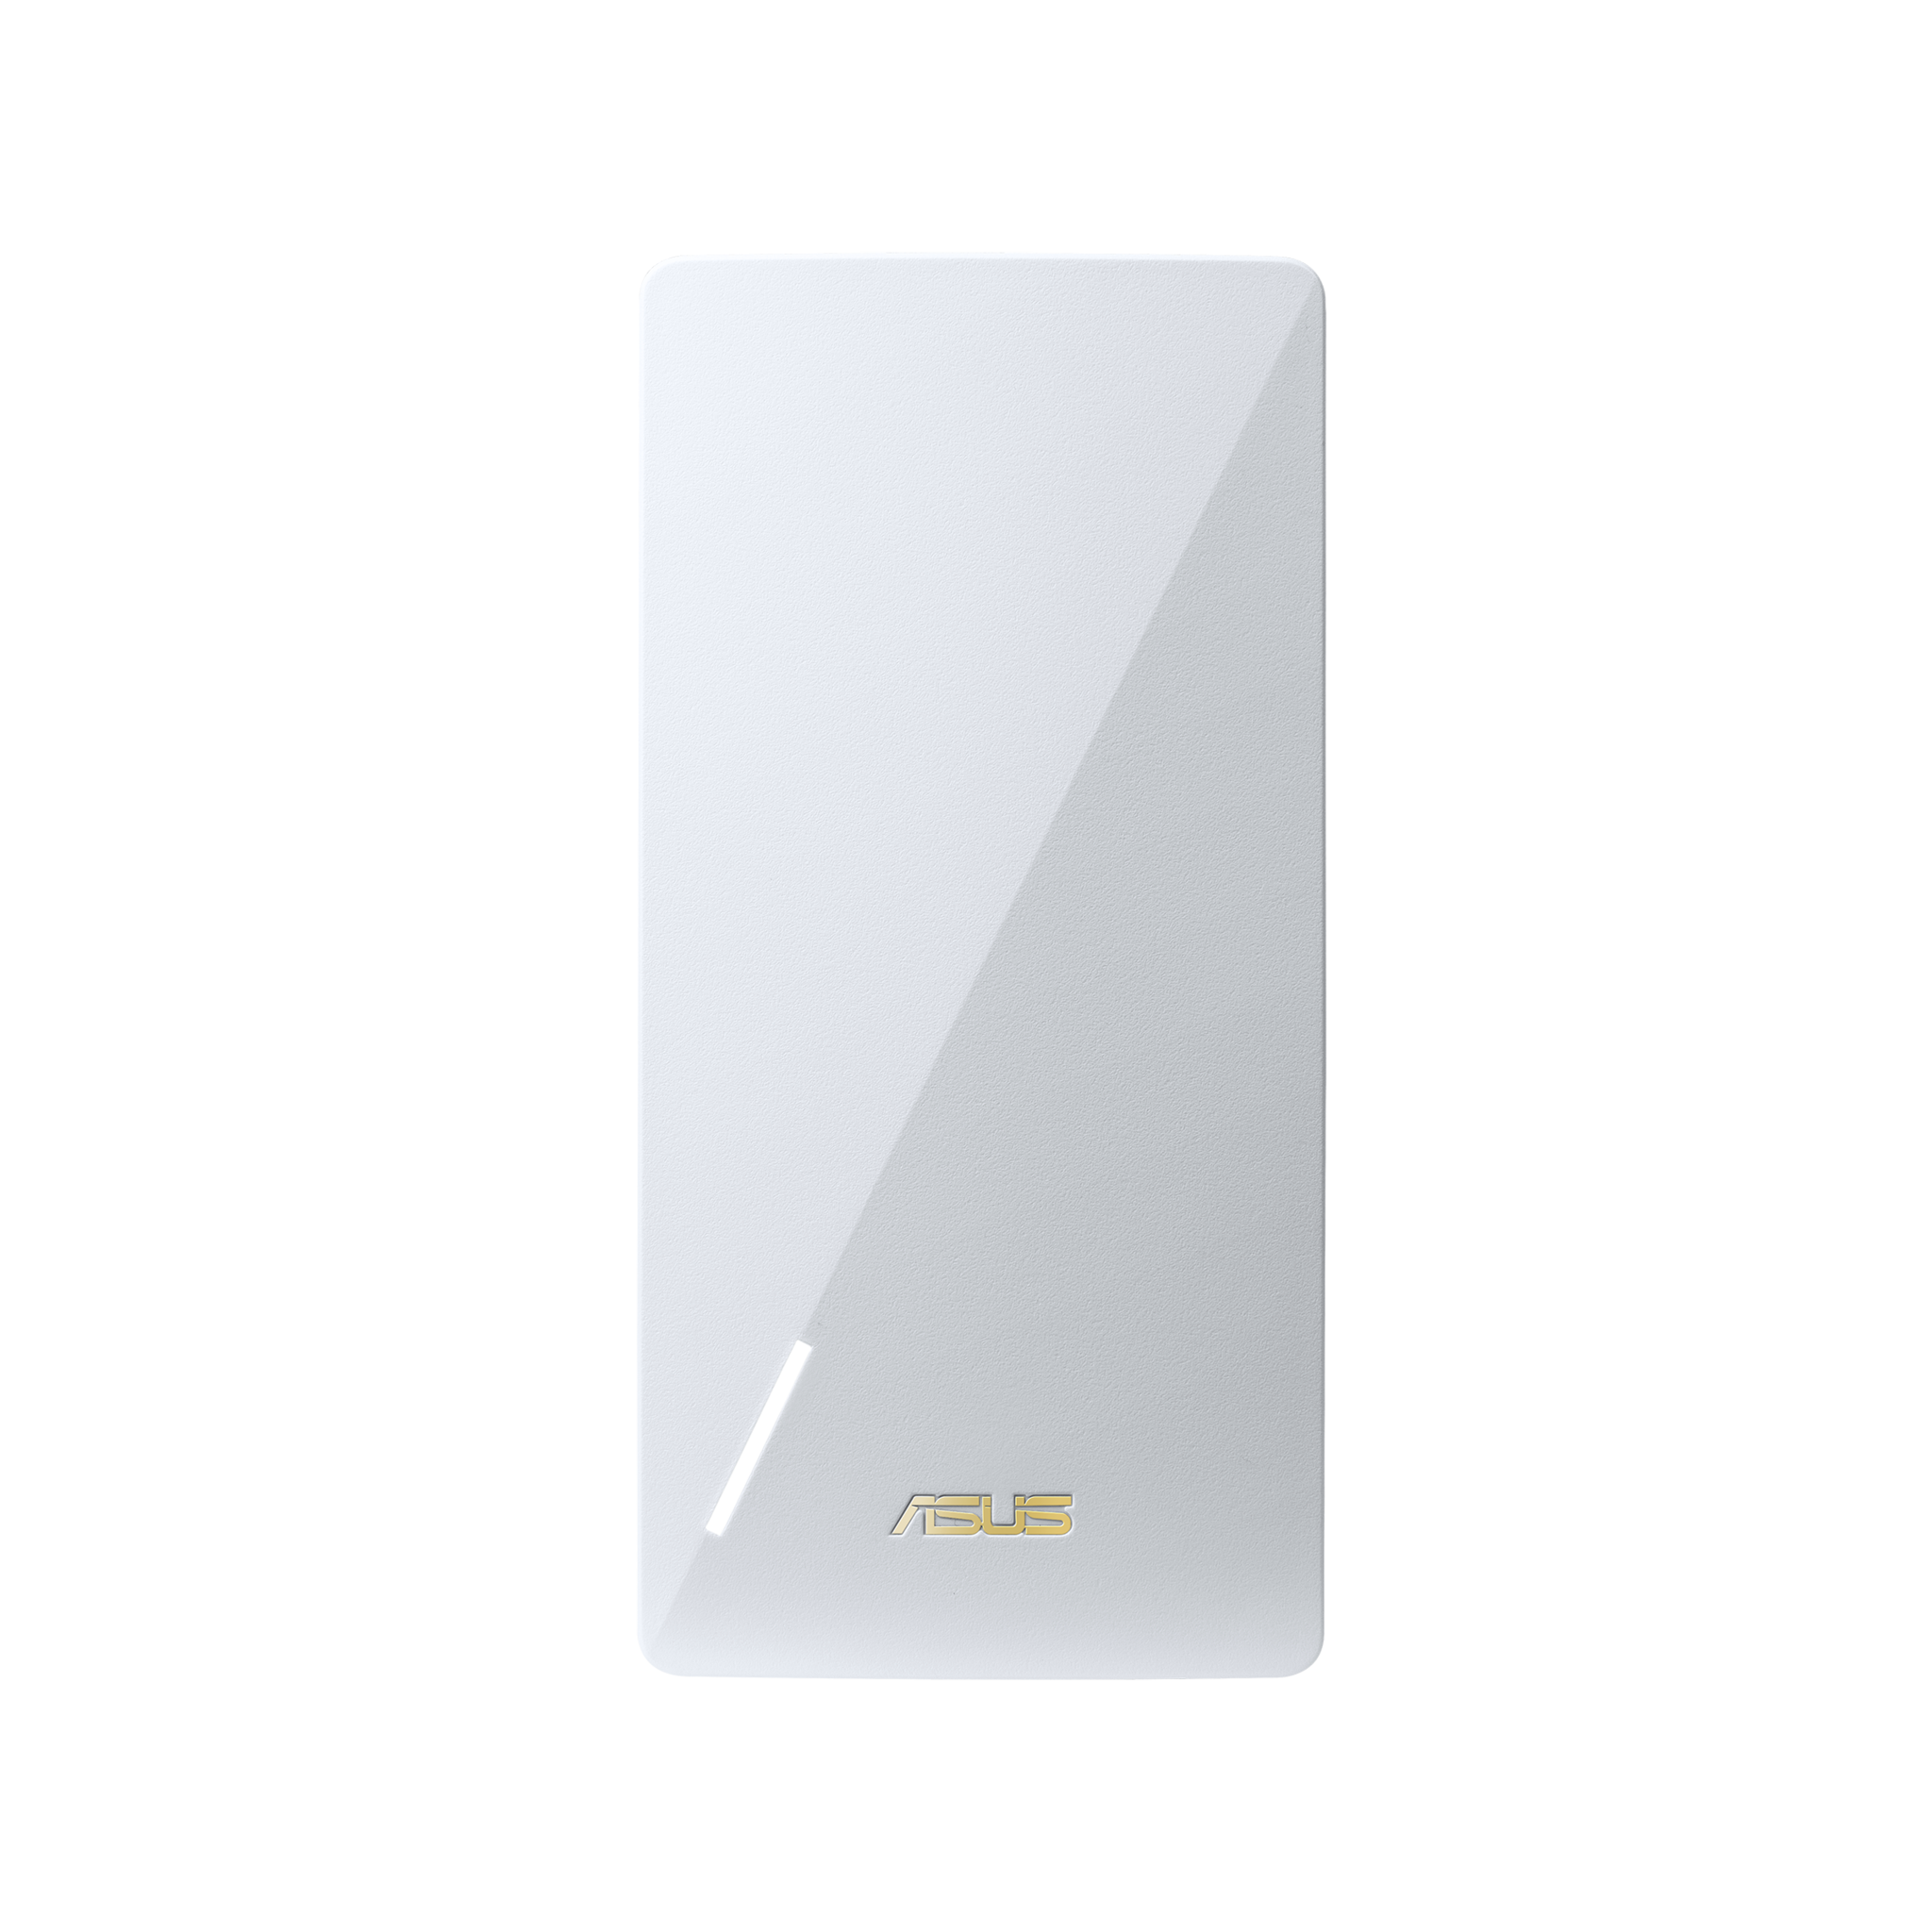 Asus RP-AX56 Extender